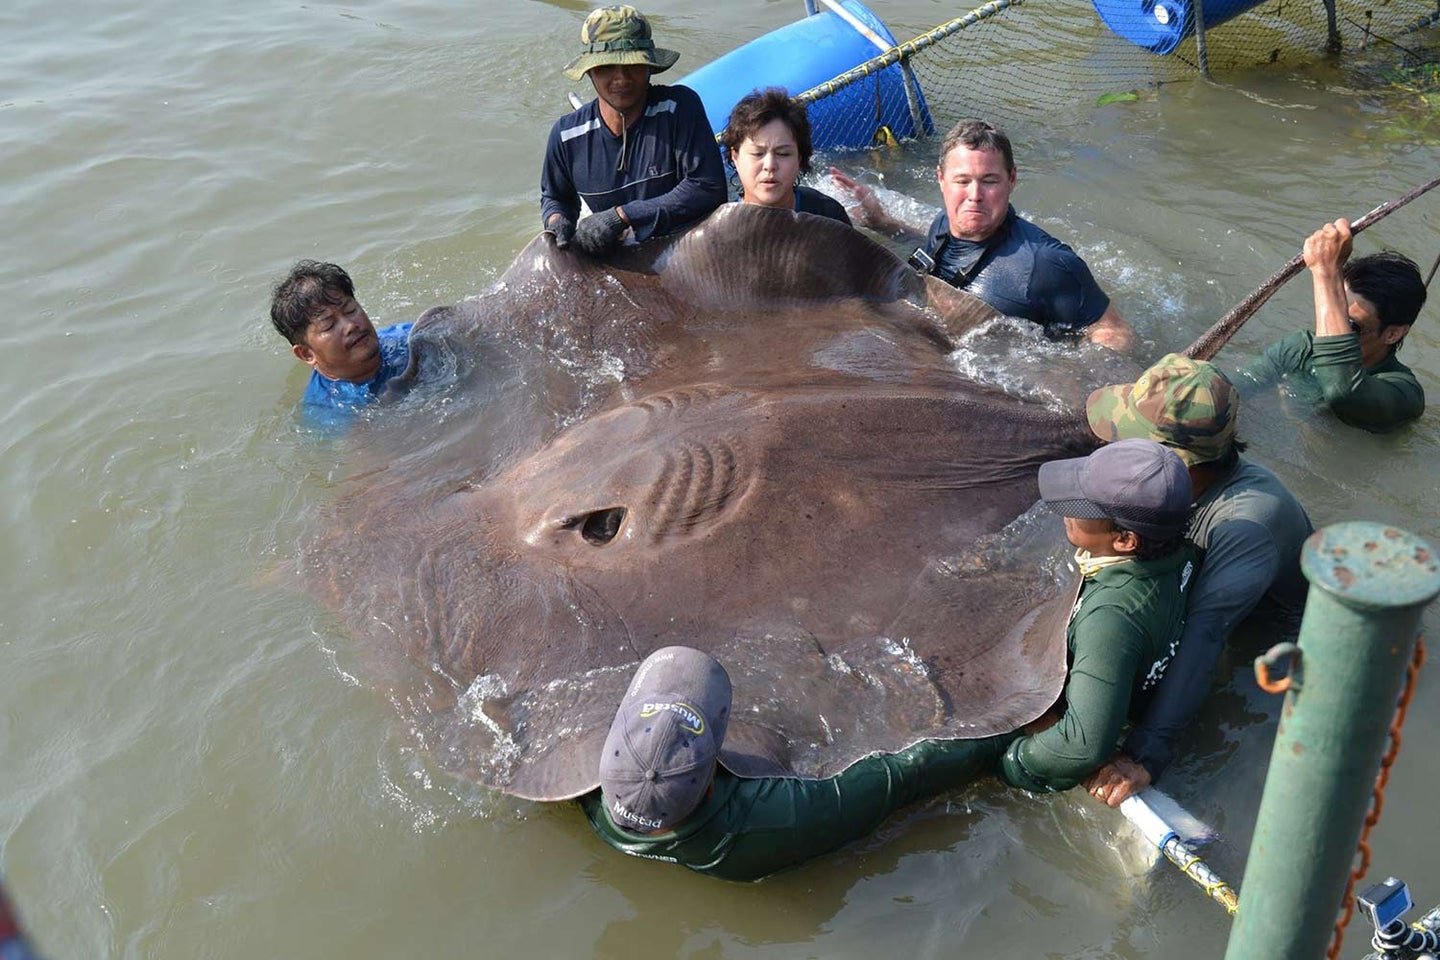 11 Giant Freshwater Fish that You’ve Probably Never Heard of Before